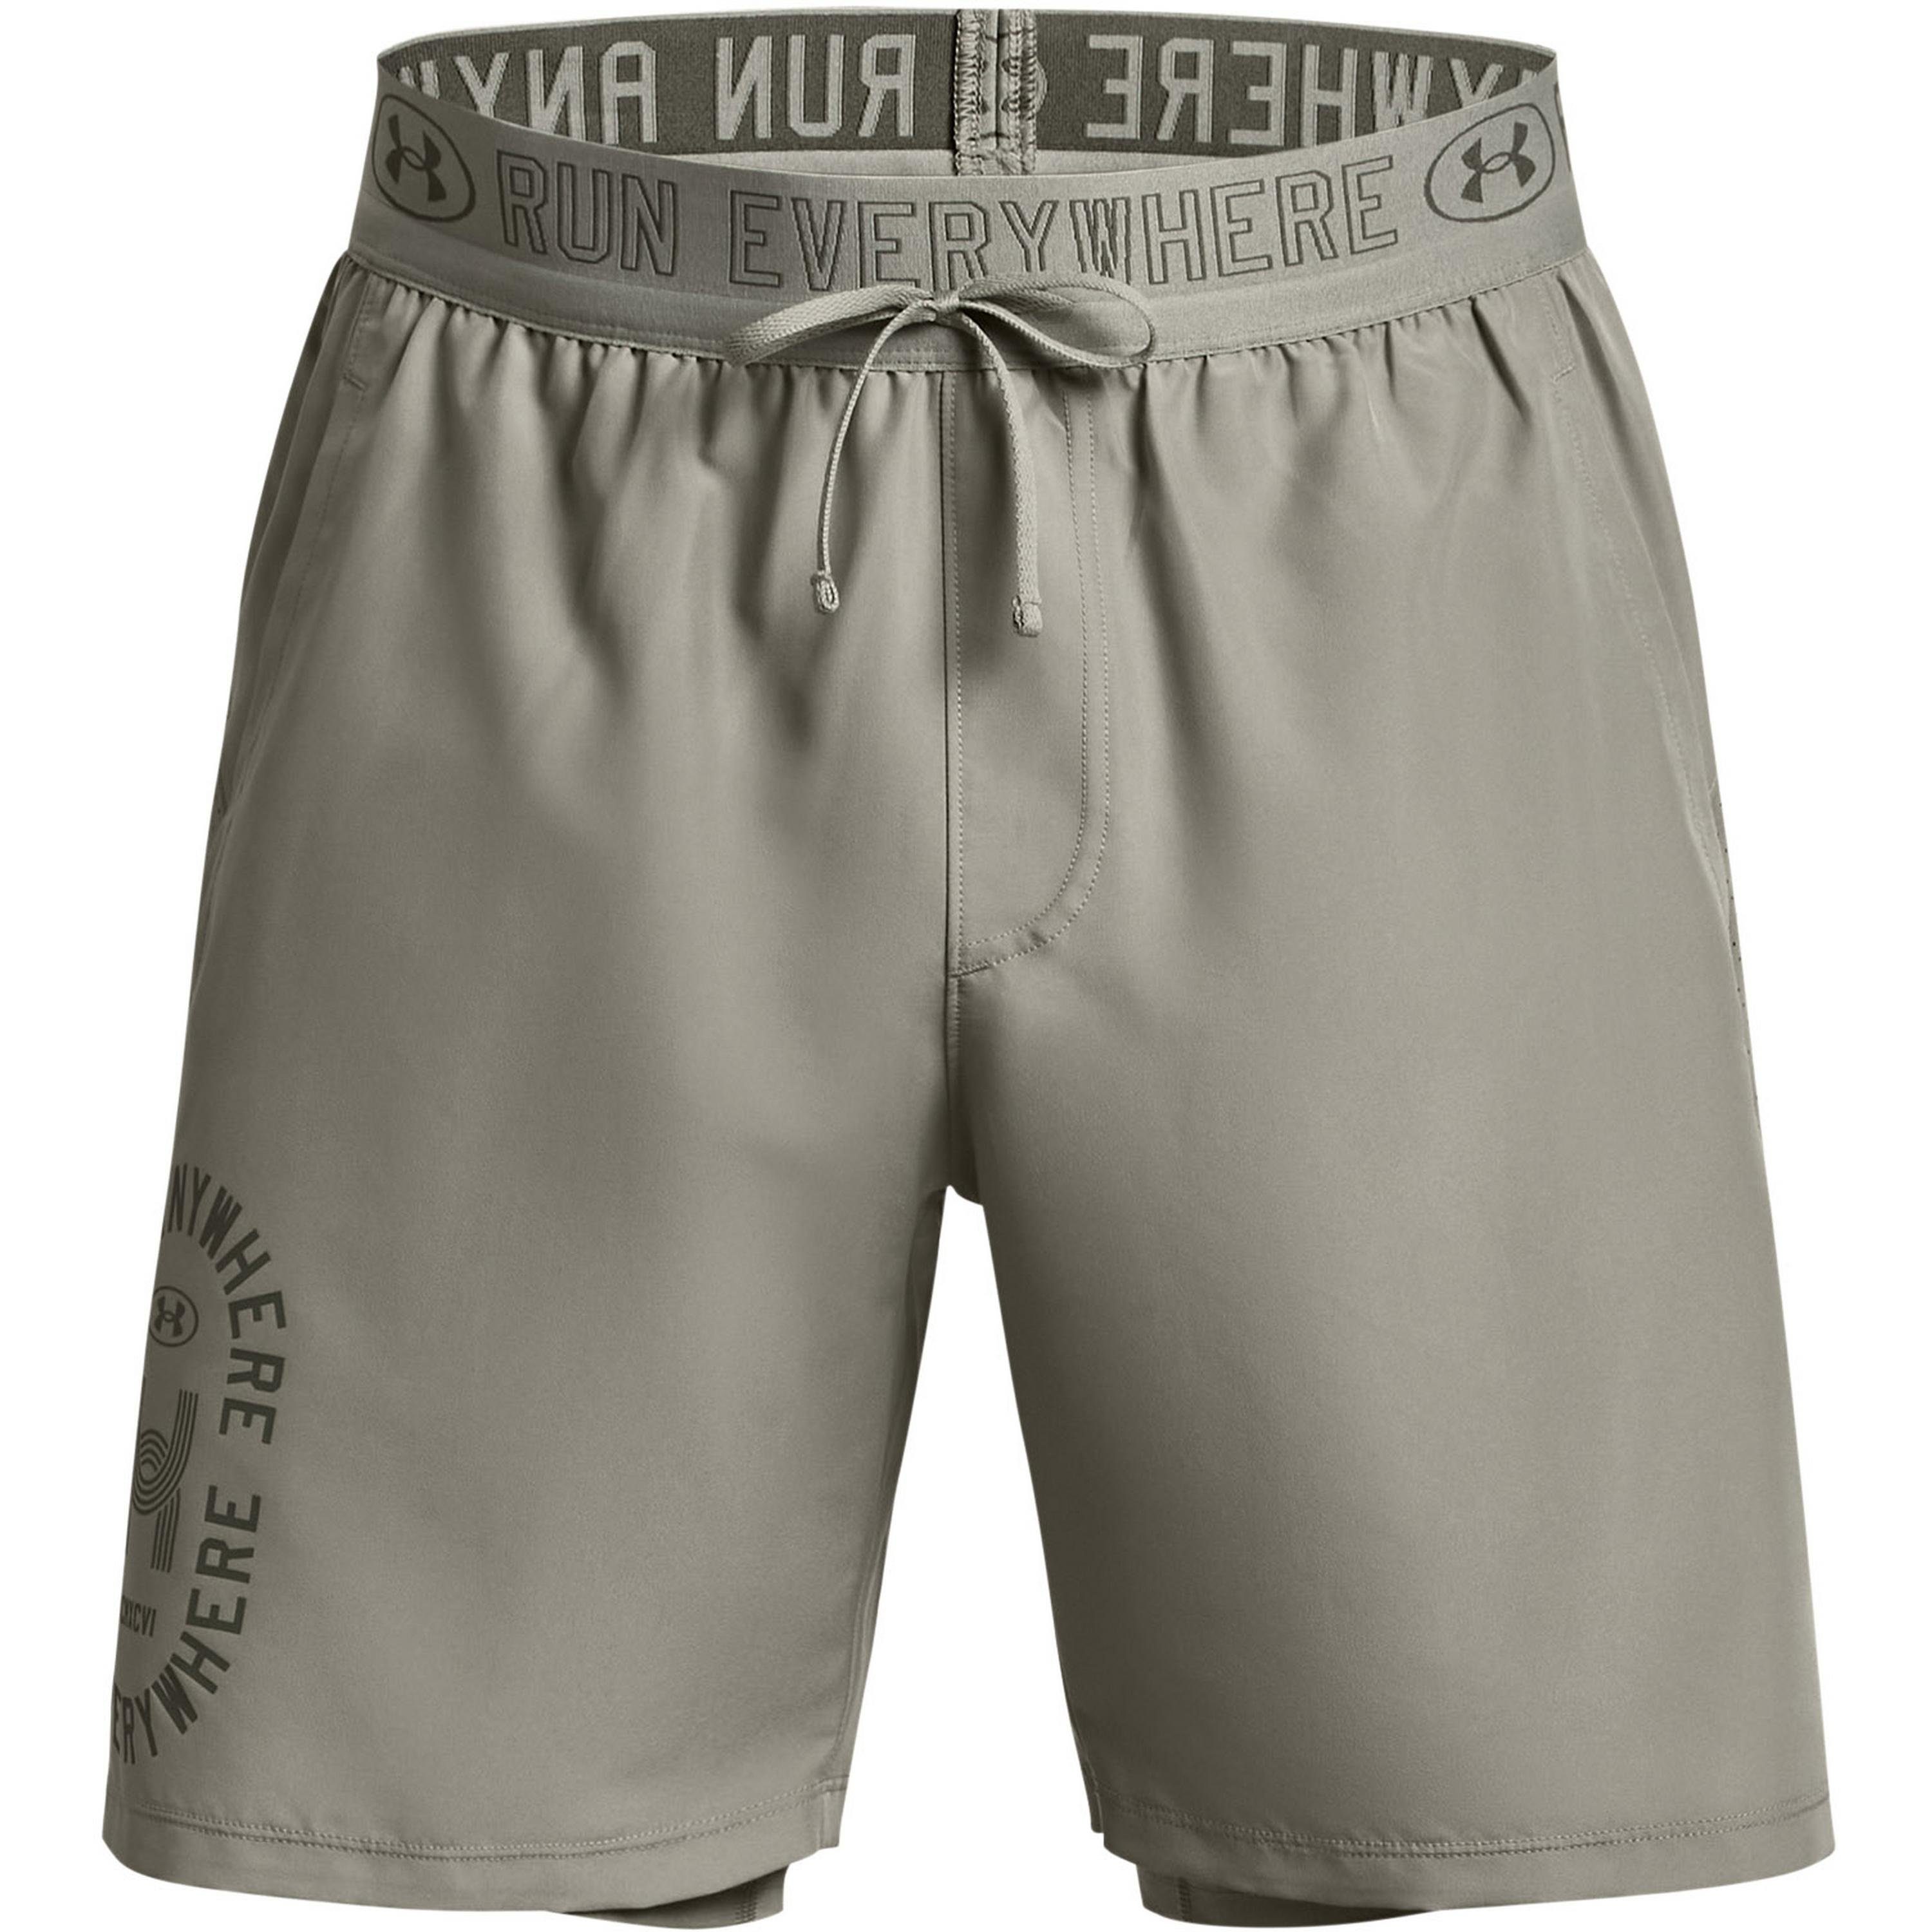 Under Armour® Funktionsshorts RUN EVERYWHERE grove green